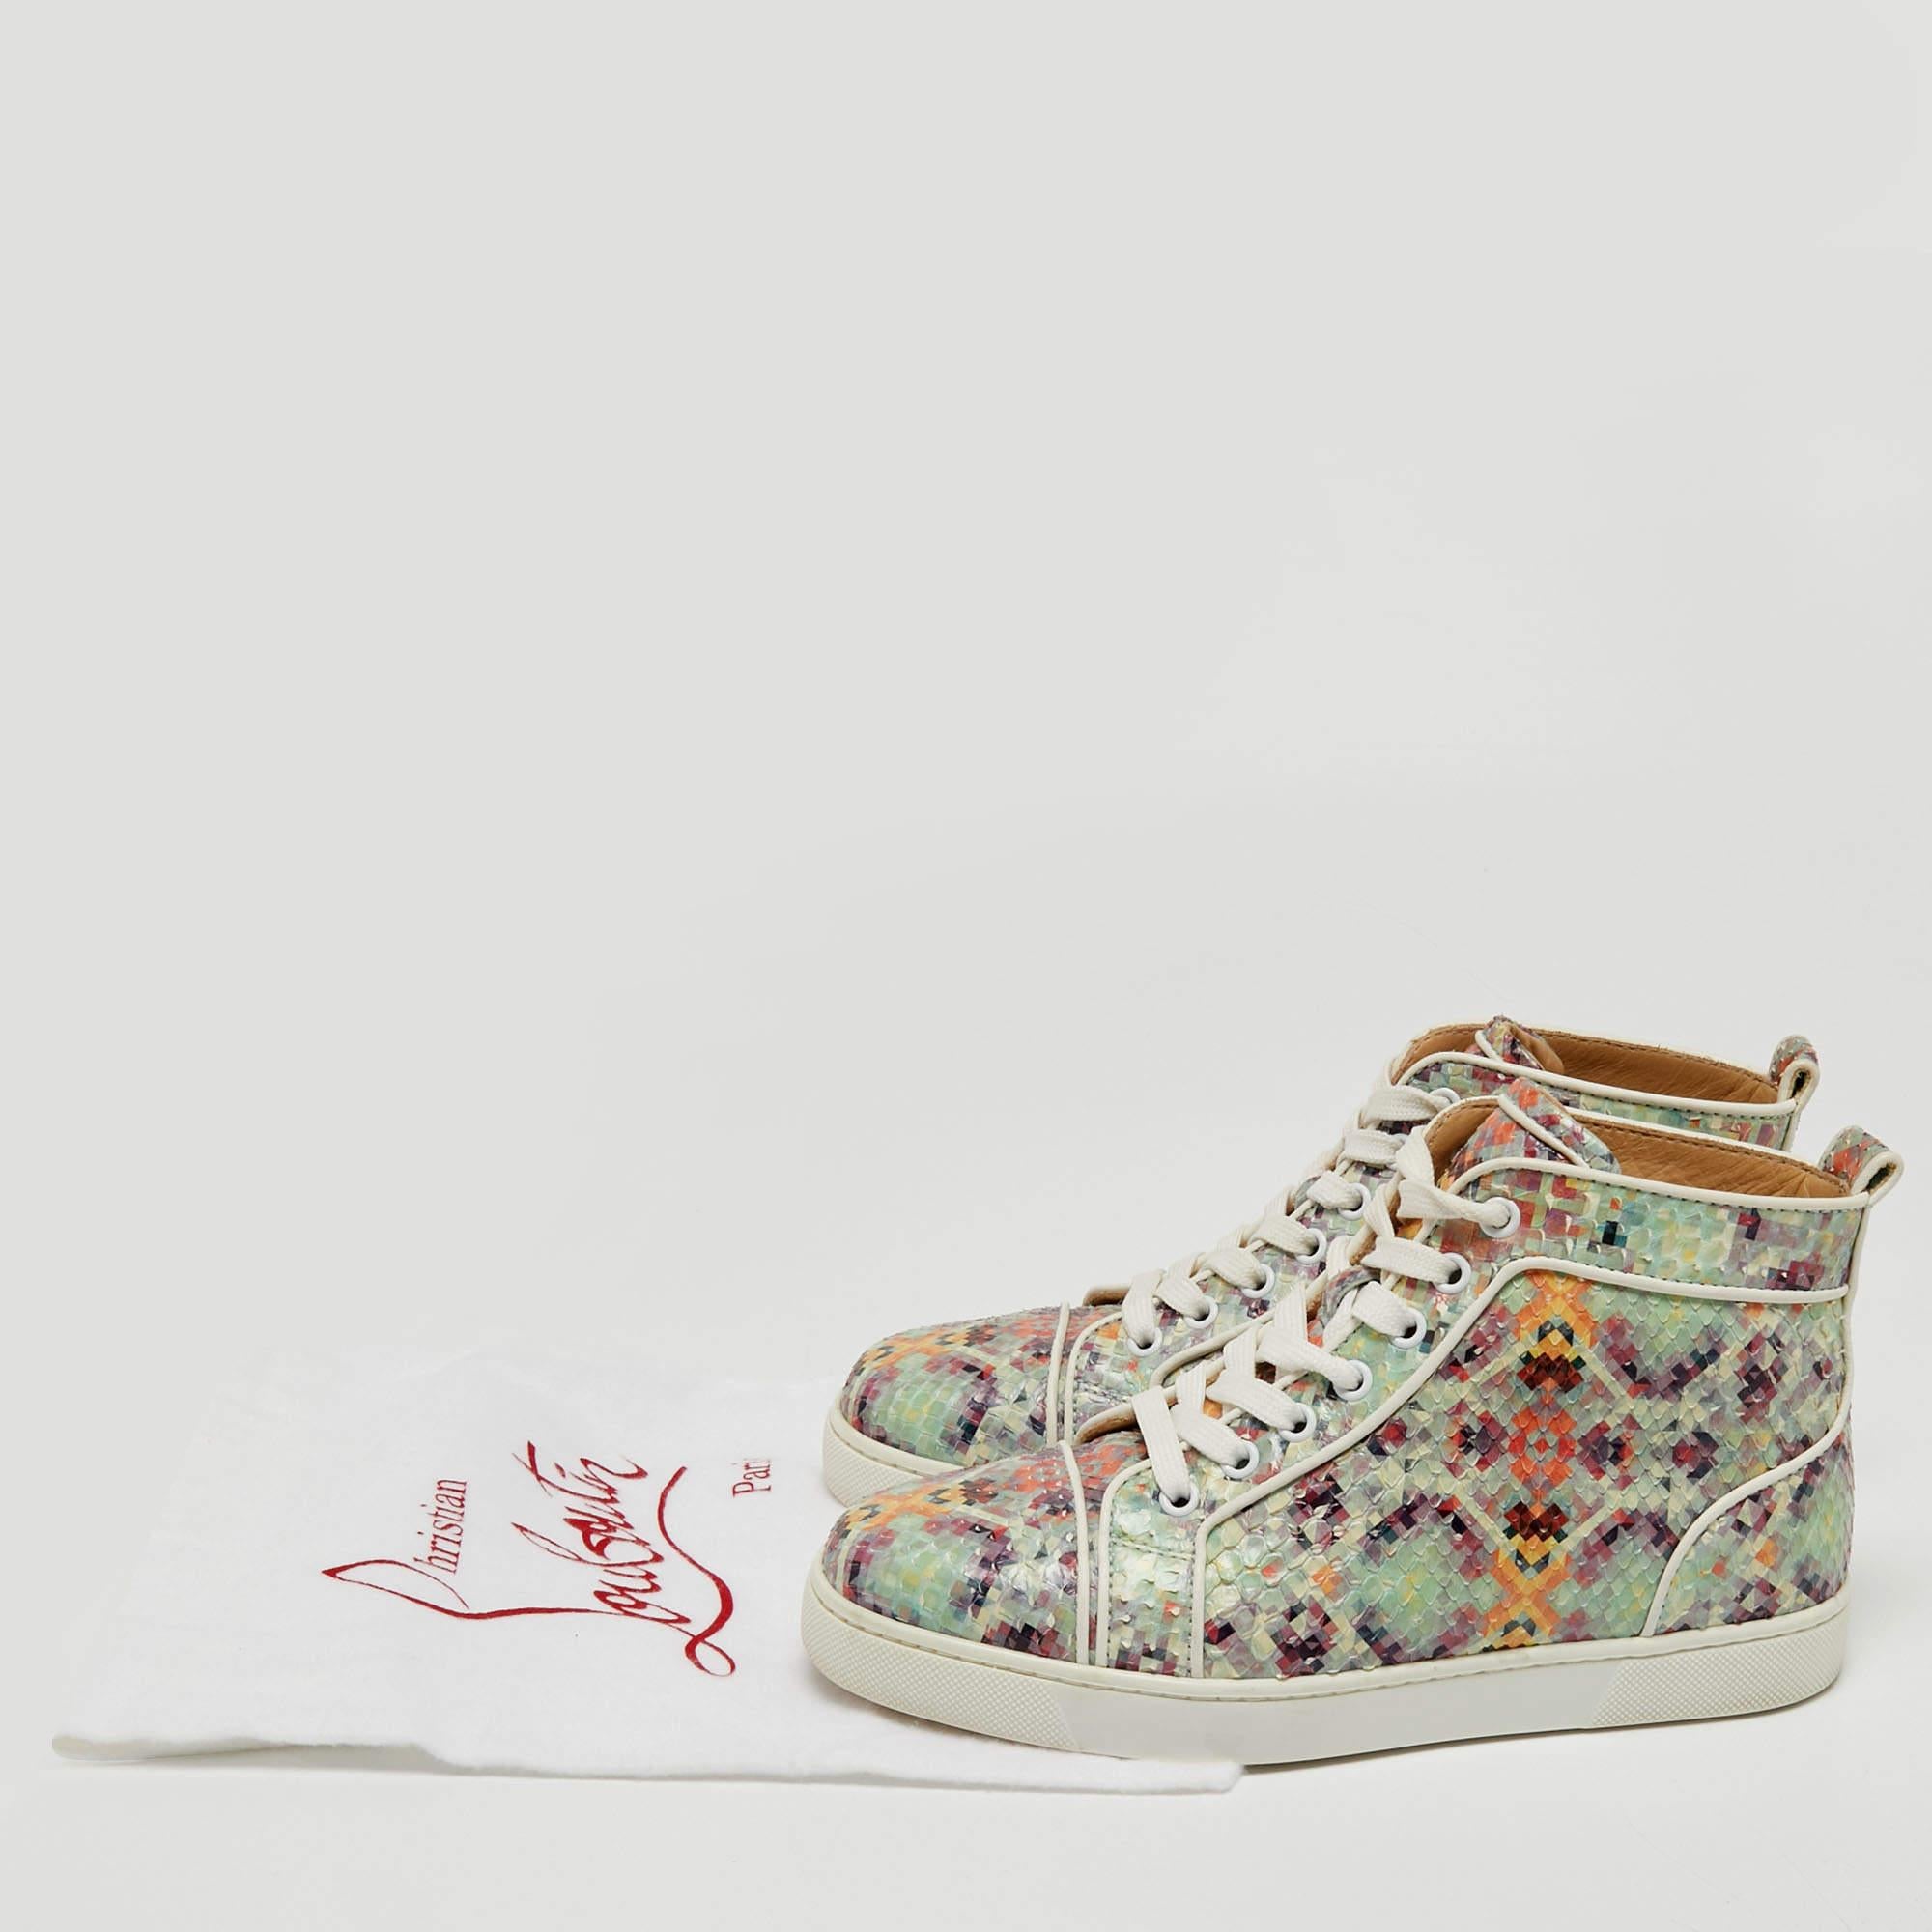 Christian Louboutin Printed Python Louis Orlato High Top Sneakers Size 37 For Sale 4